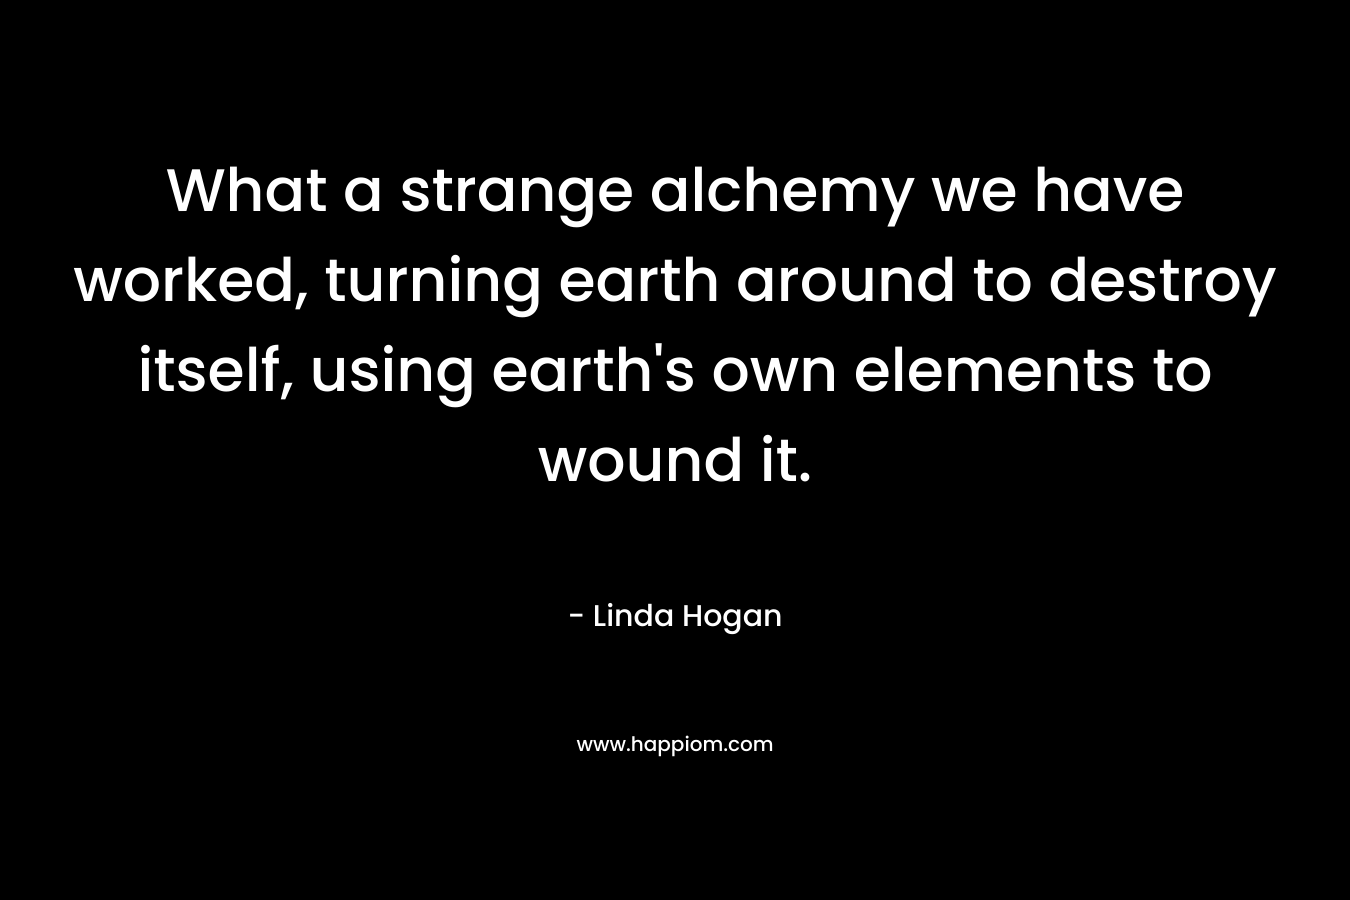 What a strange alchemy we have worked, turning earth around to destroy itself, using earth’s own elements to wound it. – Linda Hogan